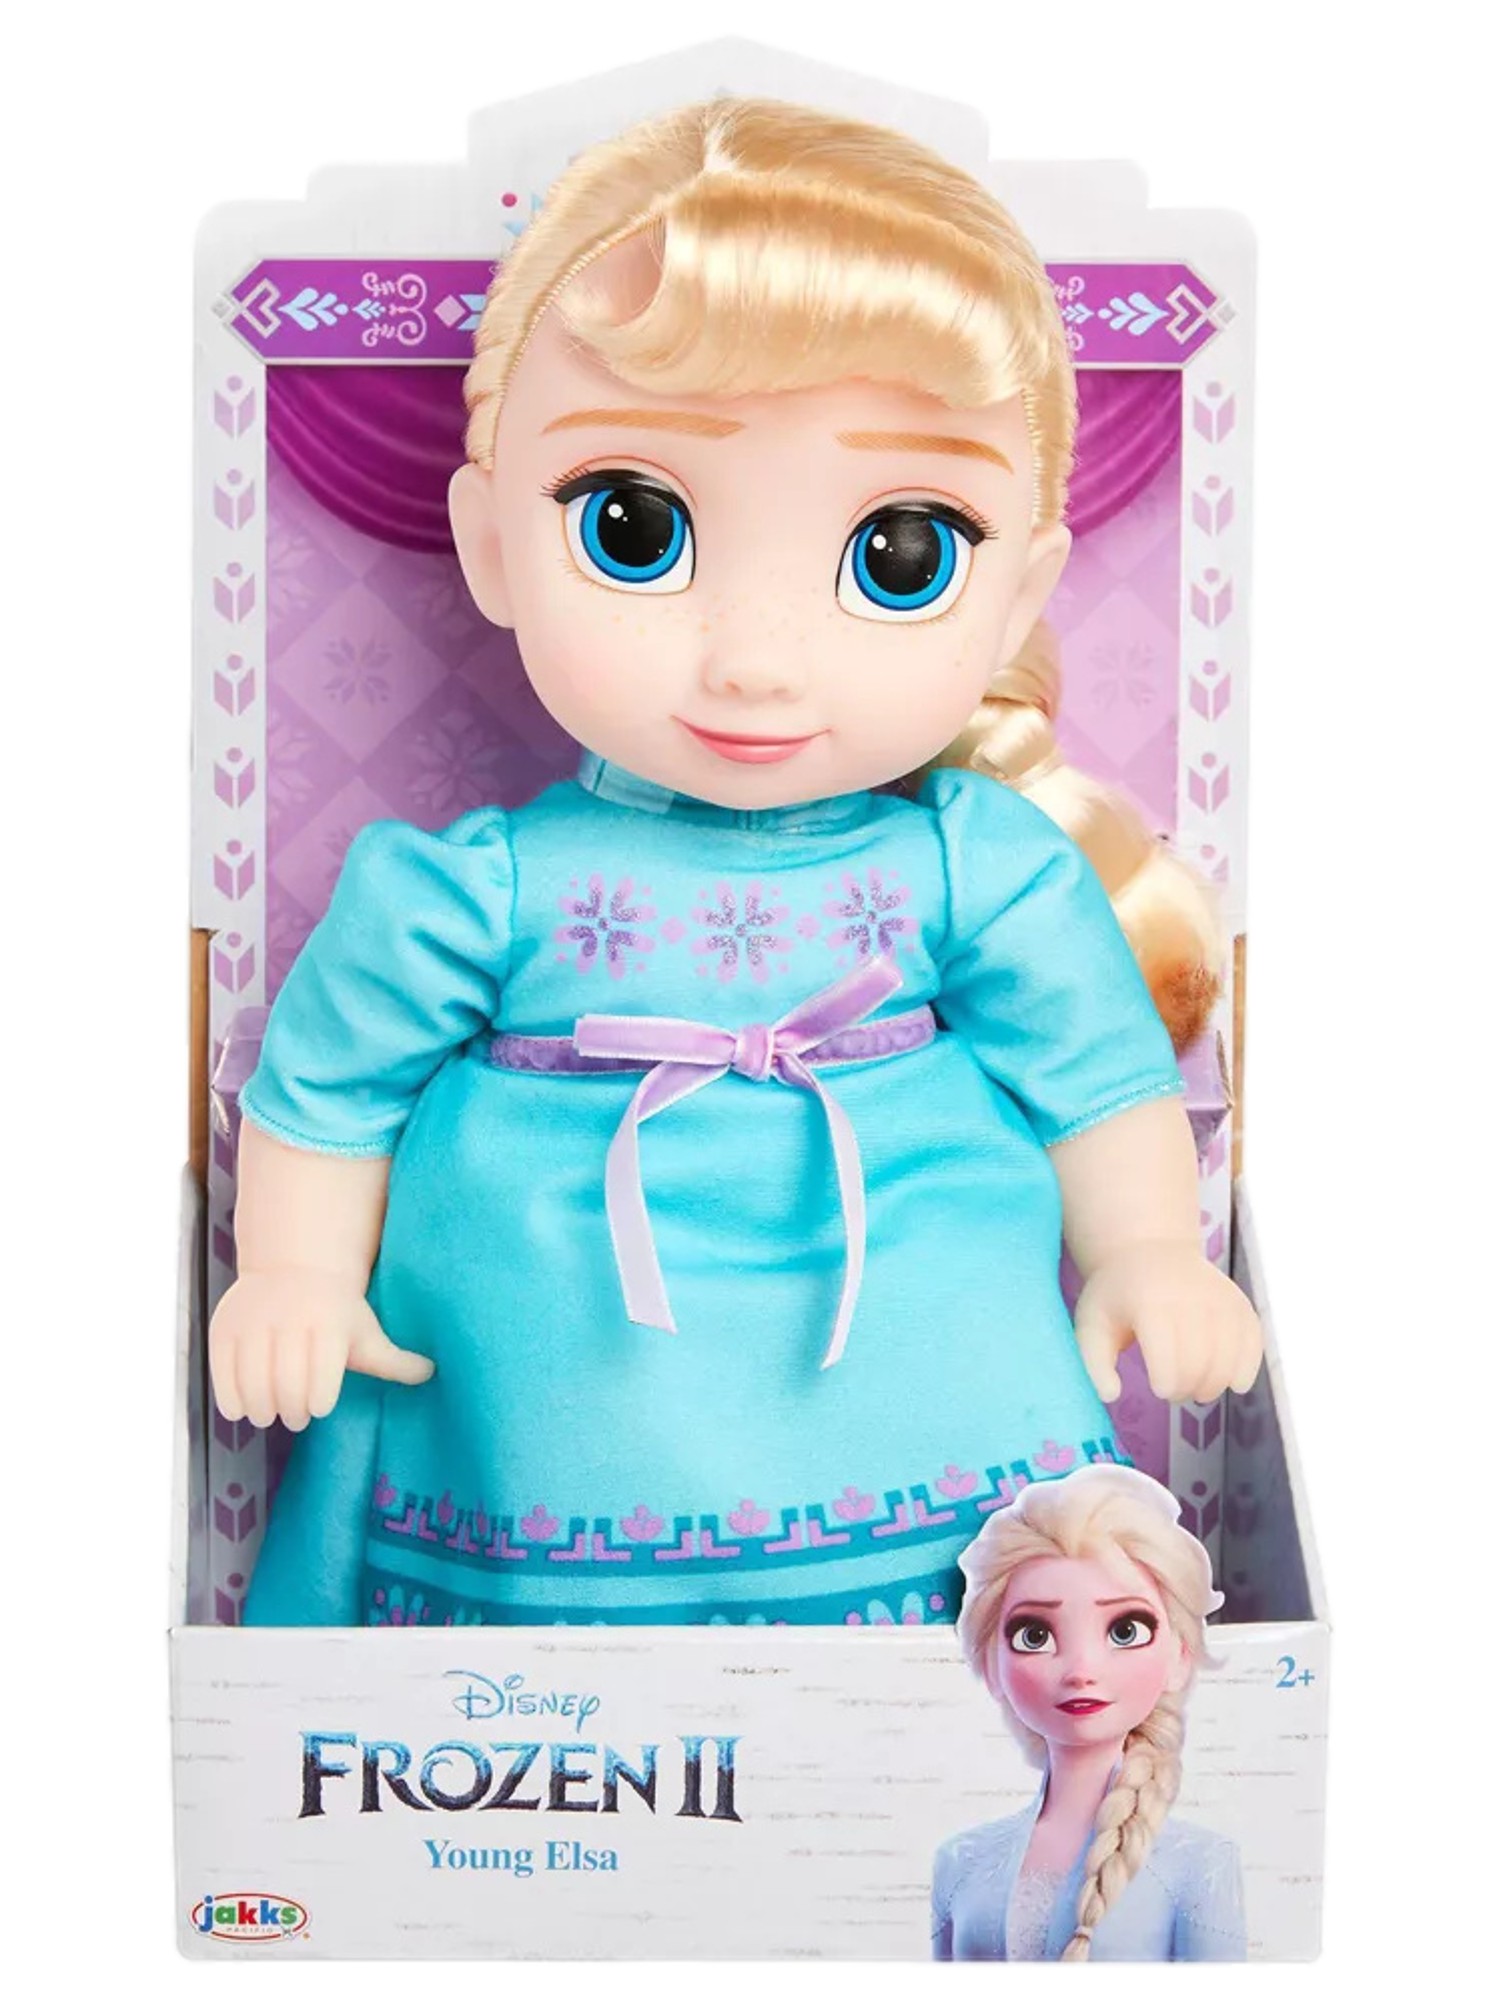 Jakks Pacific Disney Frozen Young Elsa Doll 11 inch Doll with Soft Body